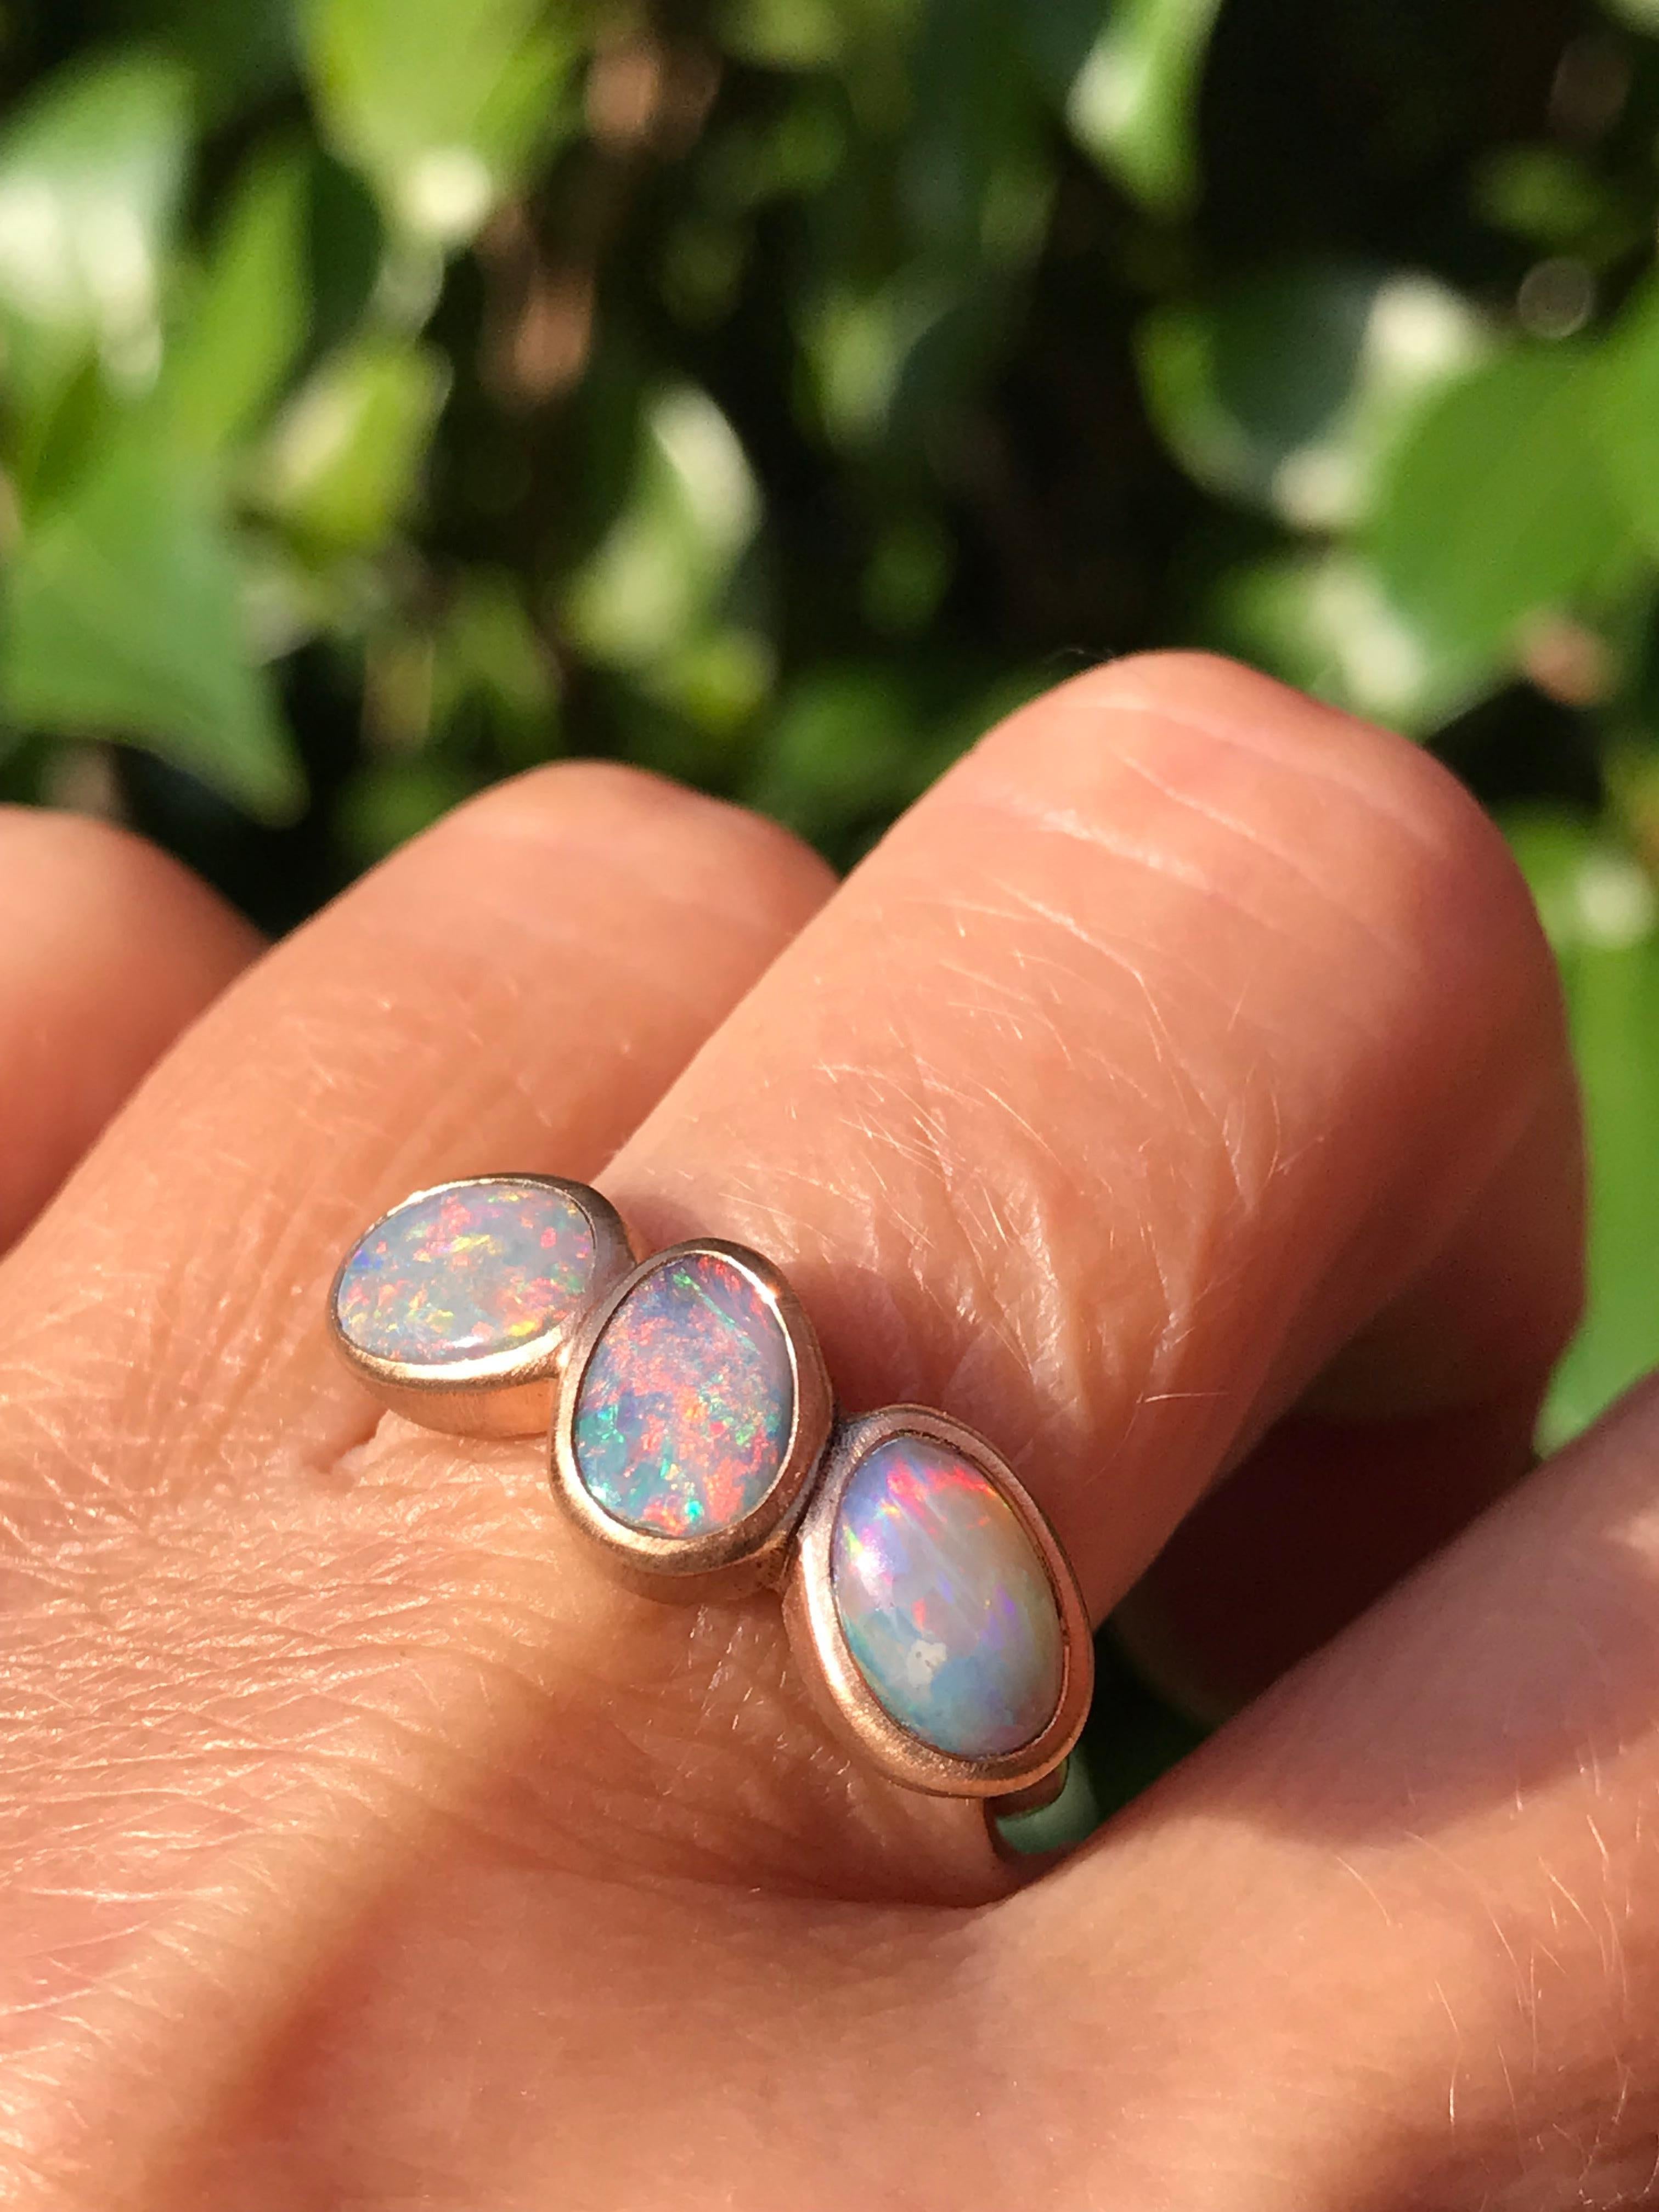 Dalben design One of a kind 18 kt rose  gold ring with three bezel-set pink - blue Australian Crystal Opals weight 2,8 carats  .  
Ring size  US 7 1/4  - EU 55 re-sizable .  
Bezels setting dimension:  
max width 23,4 mm,  
max height 8,6 mm. 
The